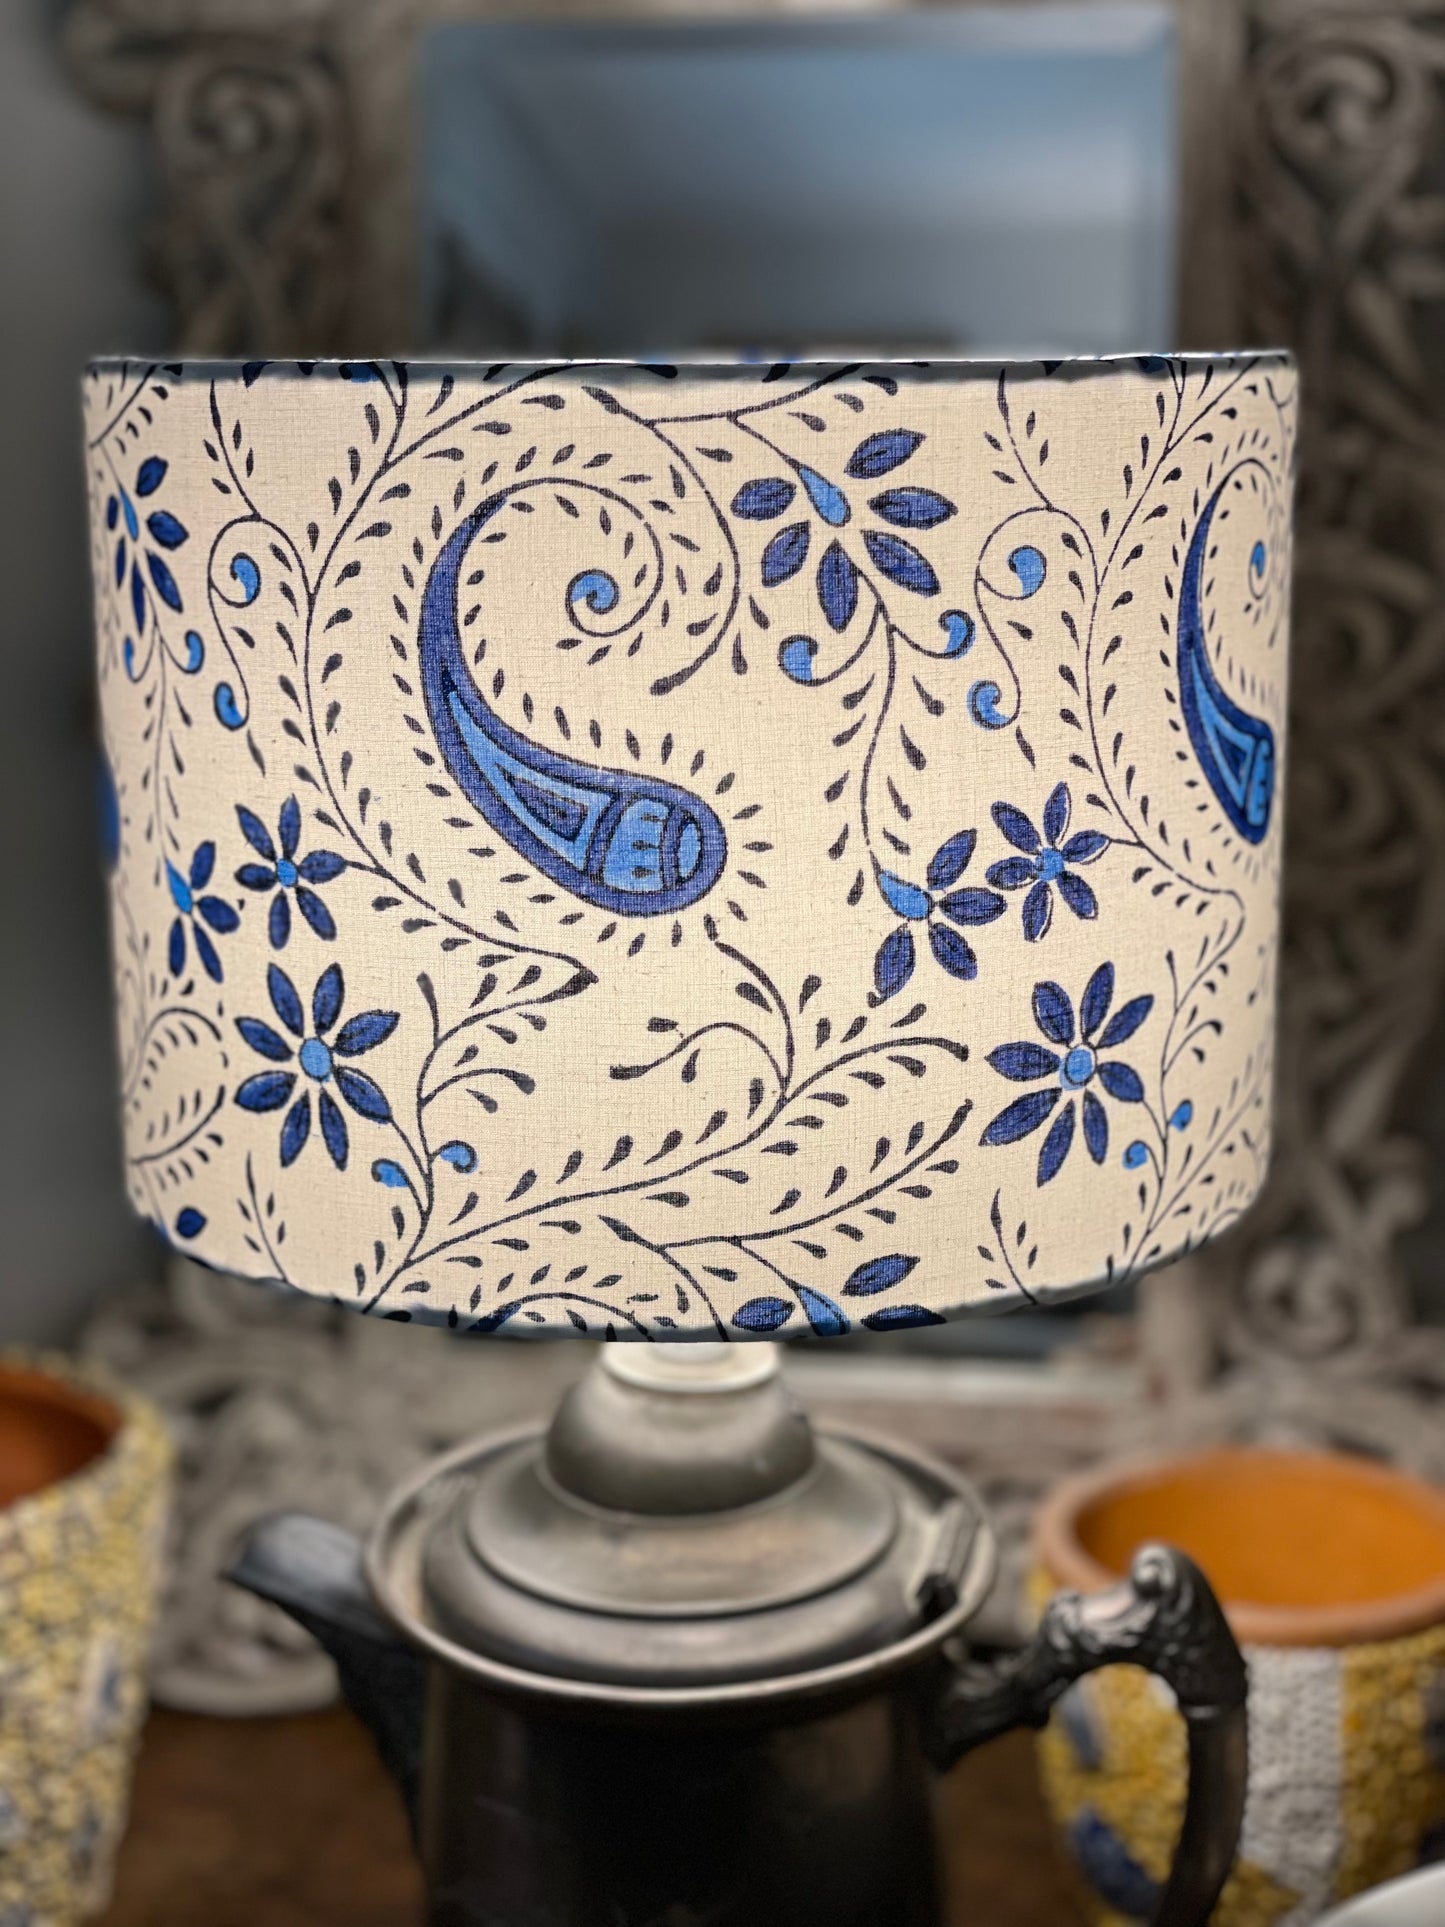 10 inch Drum Lampshade. Indian Block Print. Playful Floral and Paisley. Oxford Blue and Navy on White.